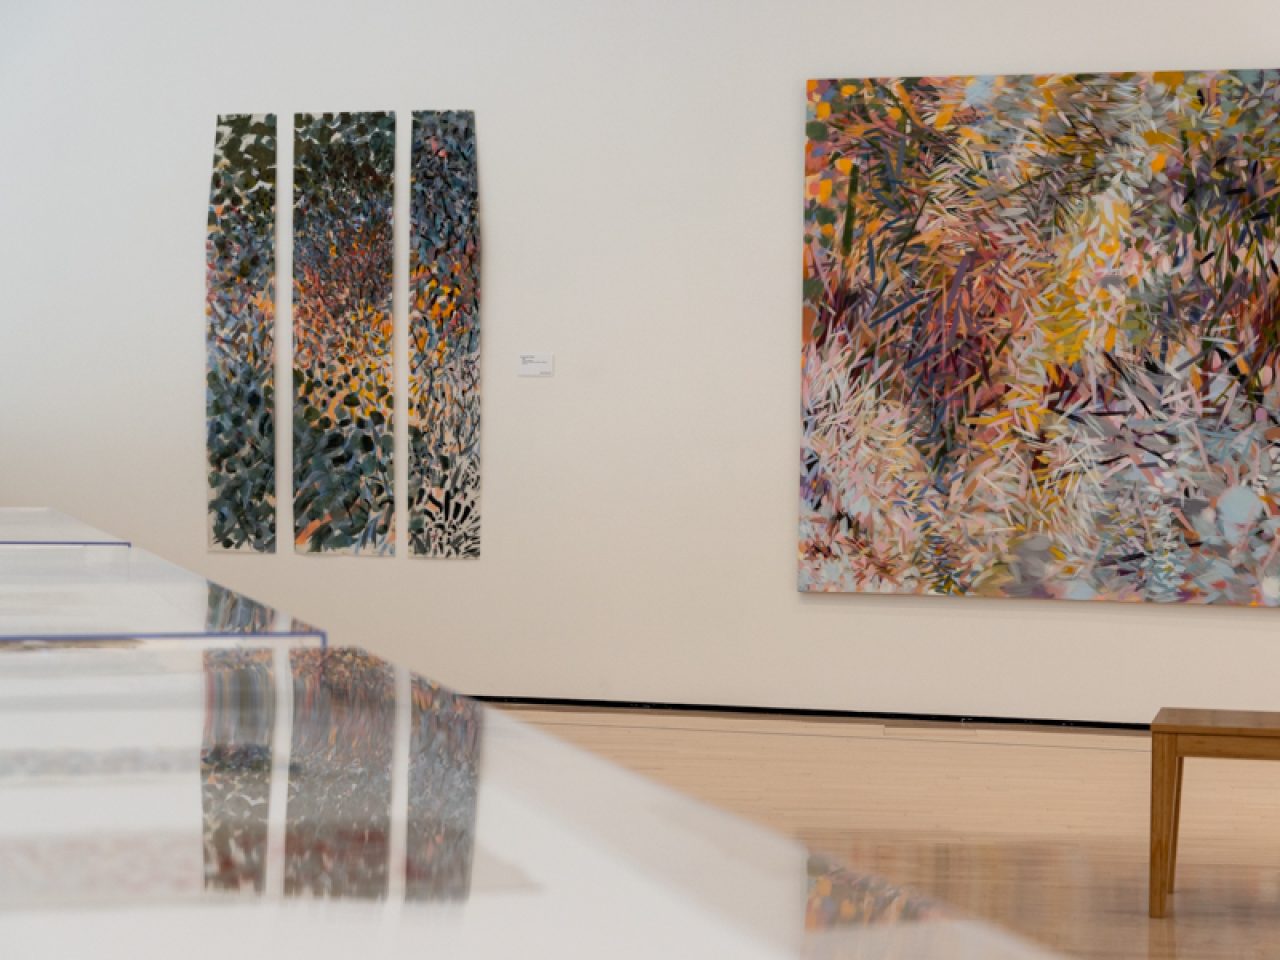 Three long and thin paintings to the left of large abstract painting